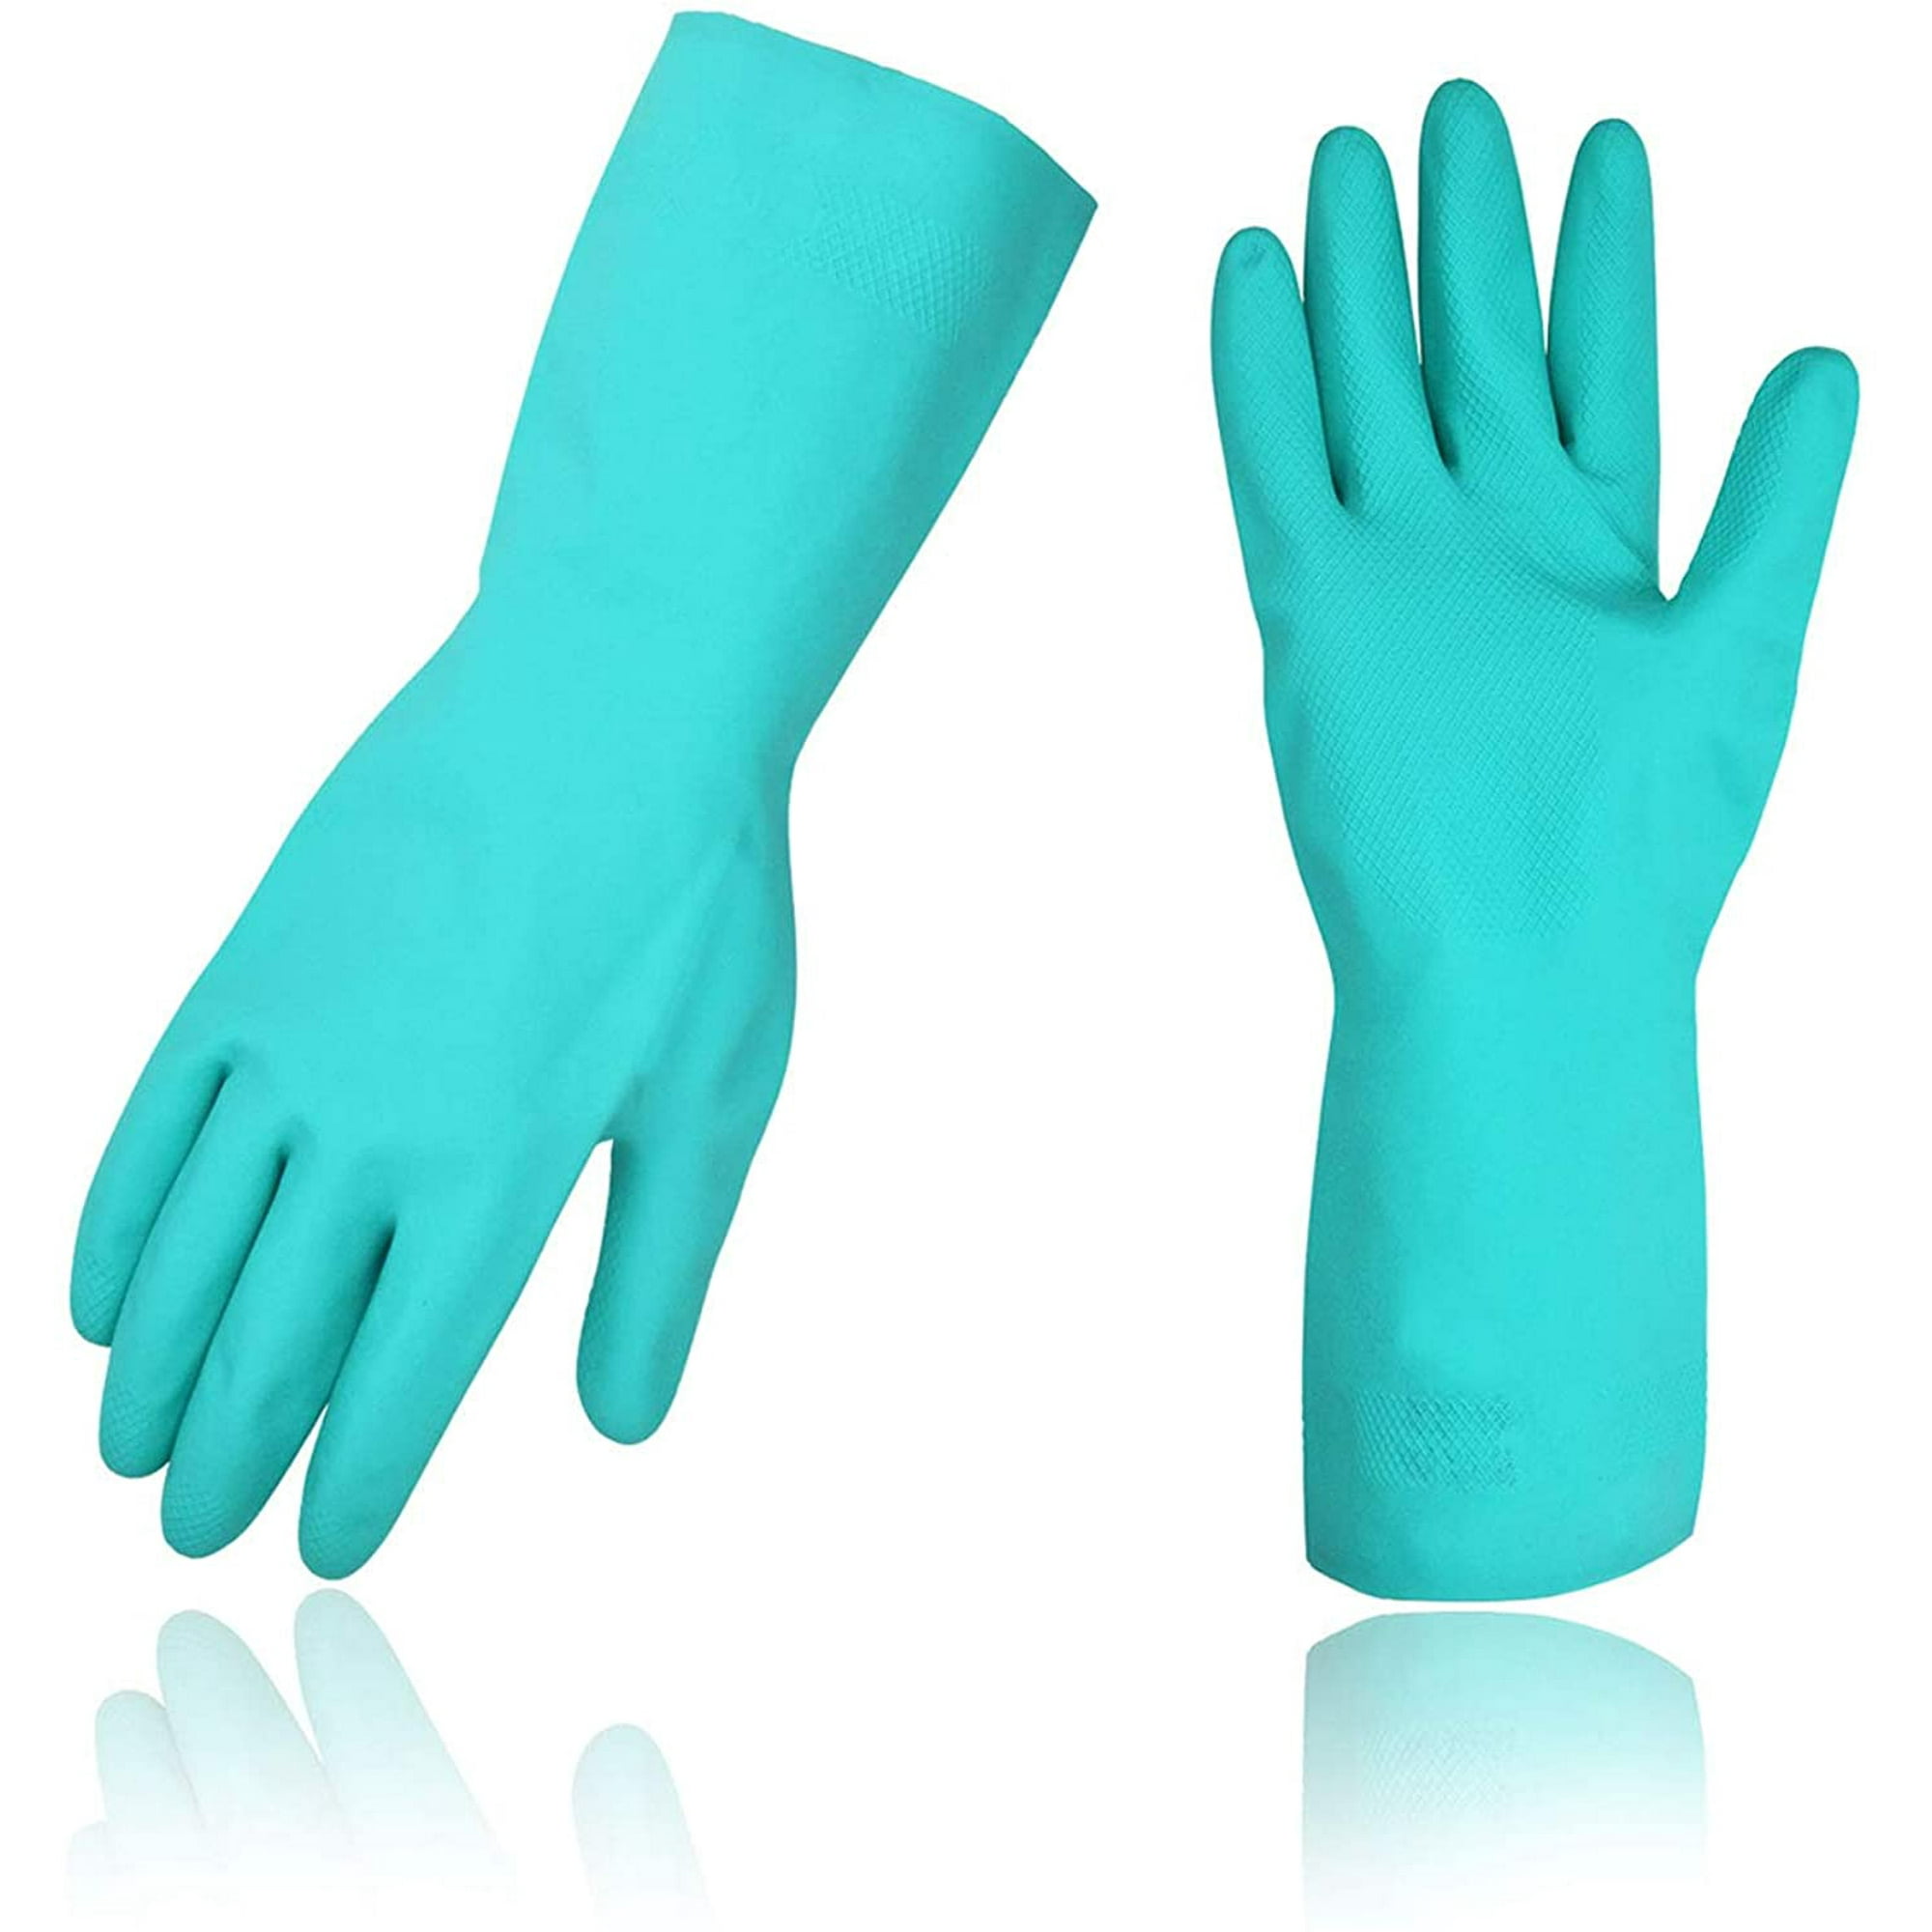 Details about   Anti-Slip High-Quality Nitrile Gloves for Household Cleaning & General Purposes